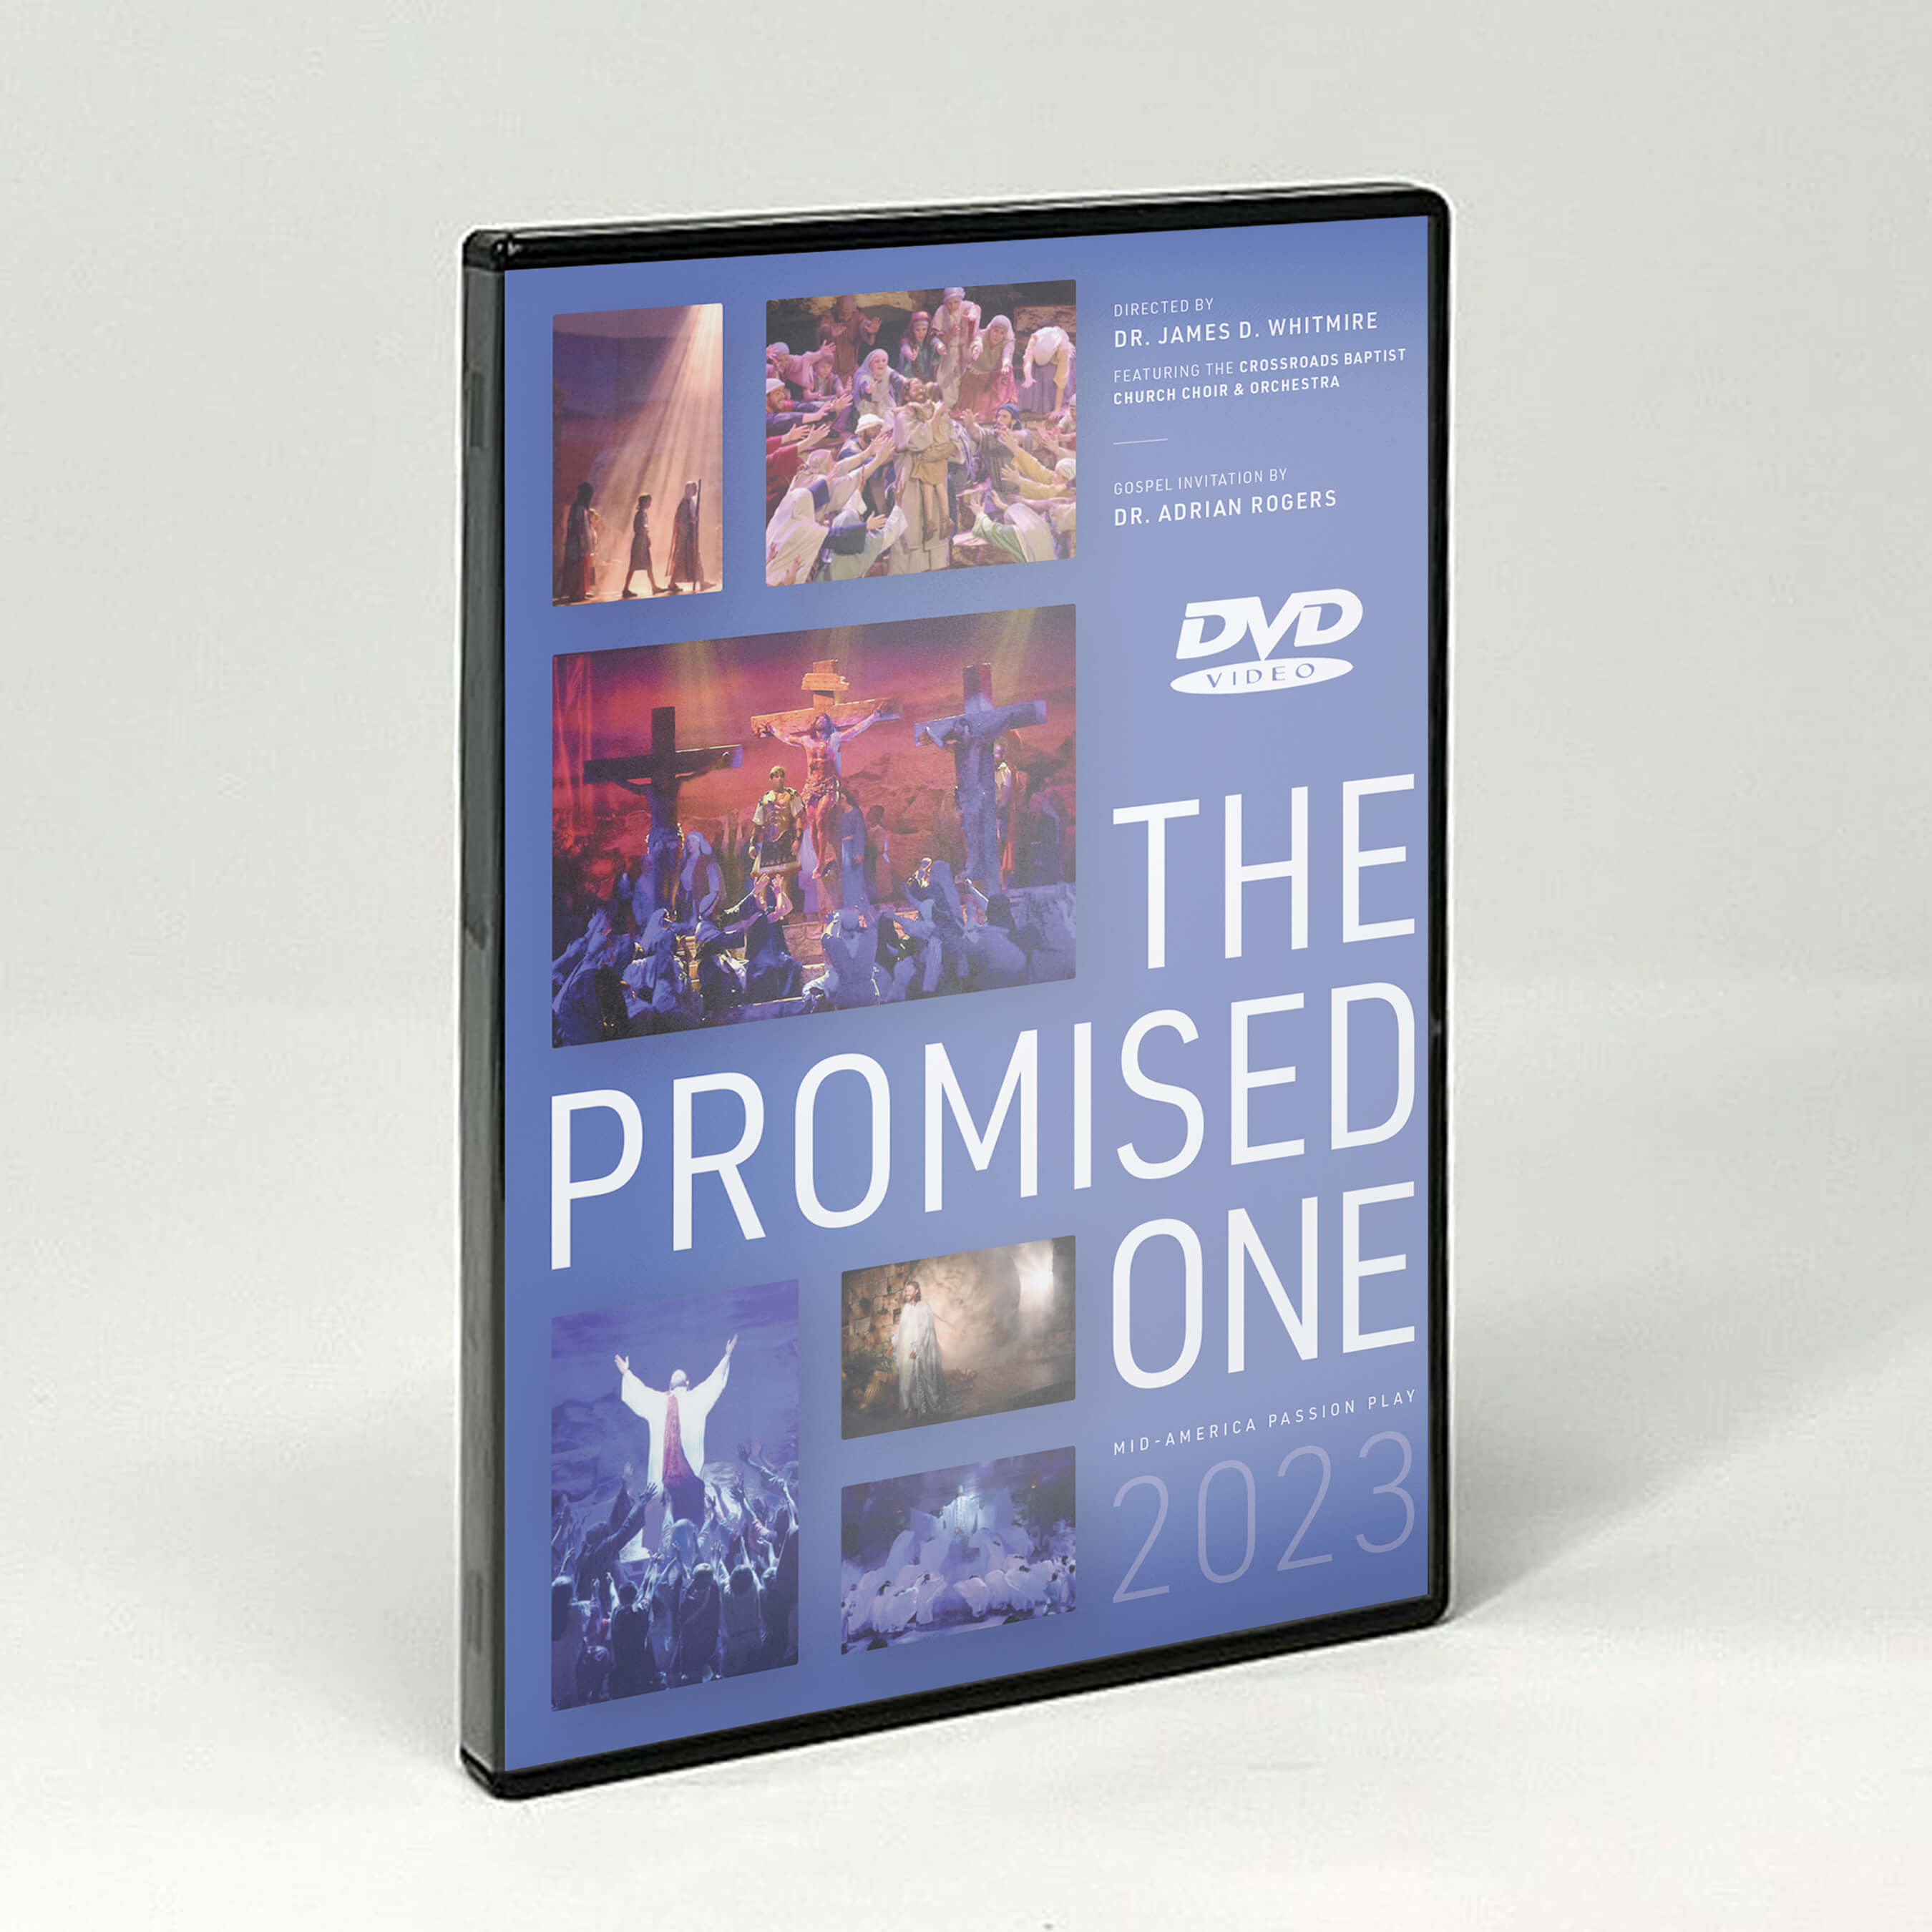 Mid-America Passion Play: The Promised One